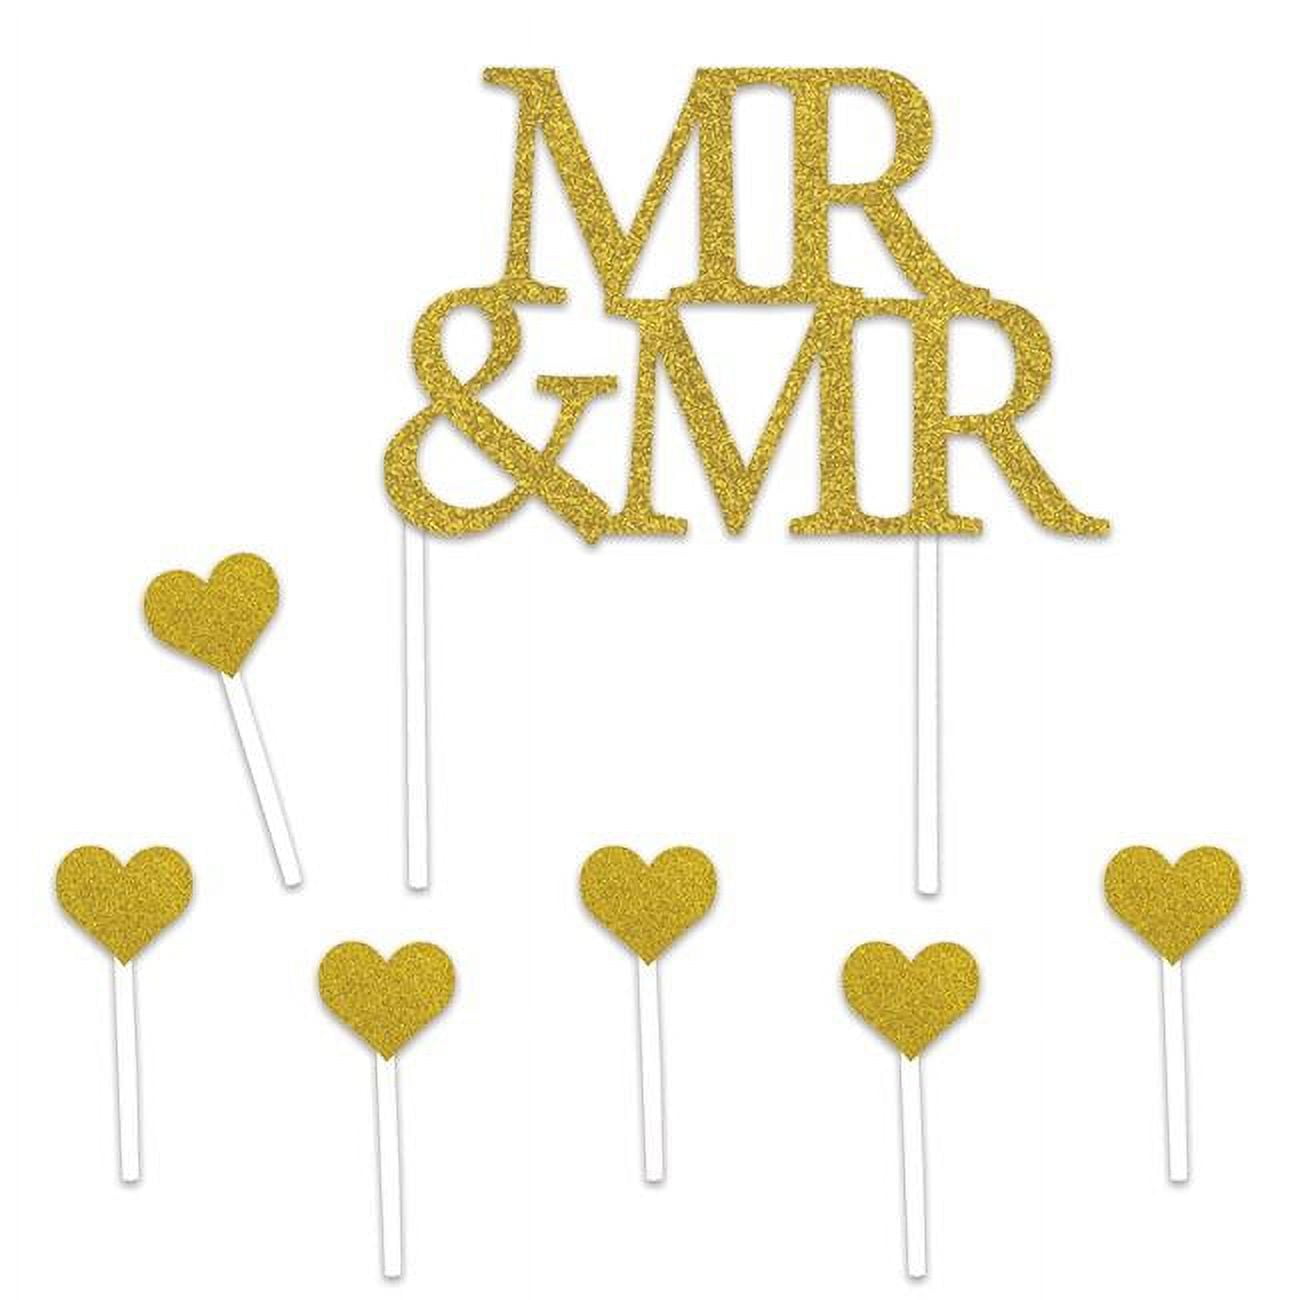 Picture of Beistle 53474 5.5 to 8.5 in. Mr & Mr Cake Topper - Pack of 12